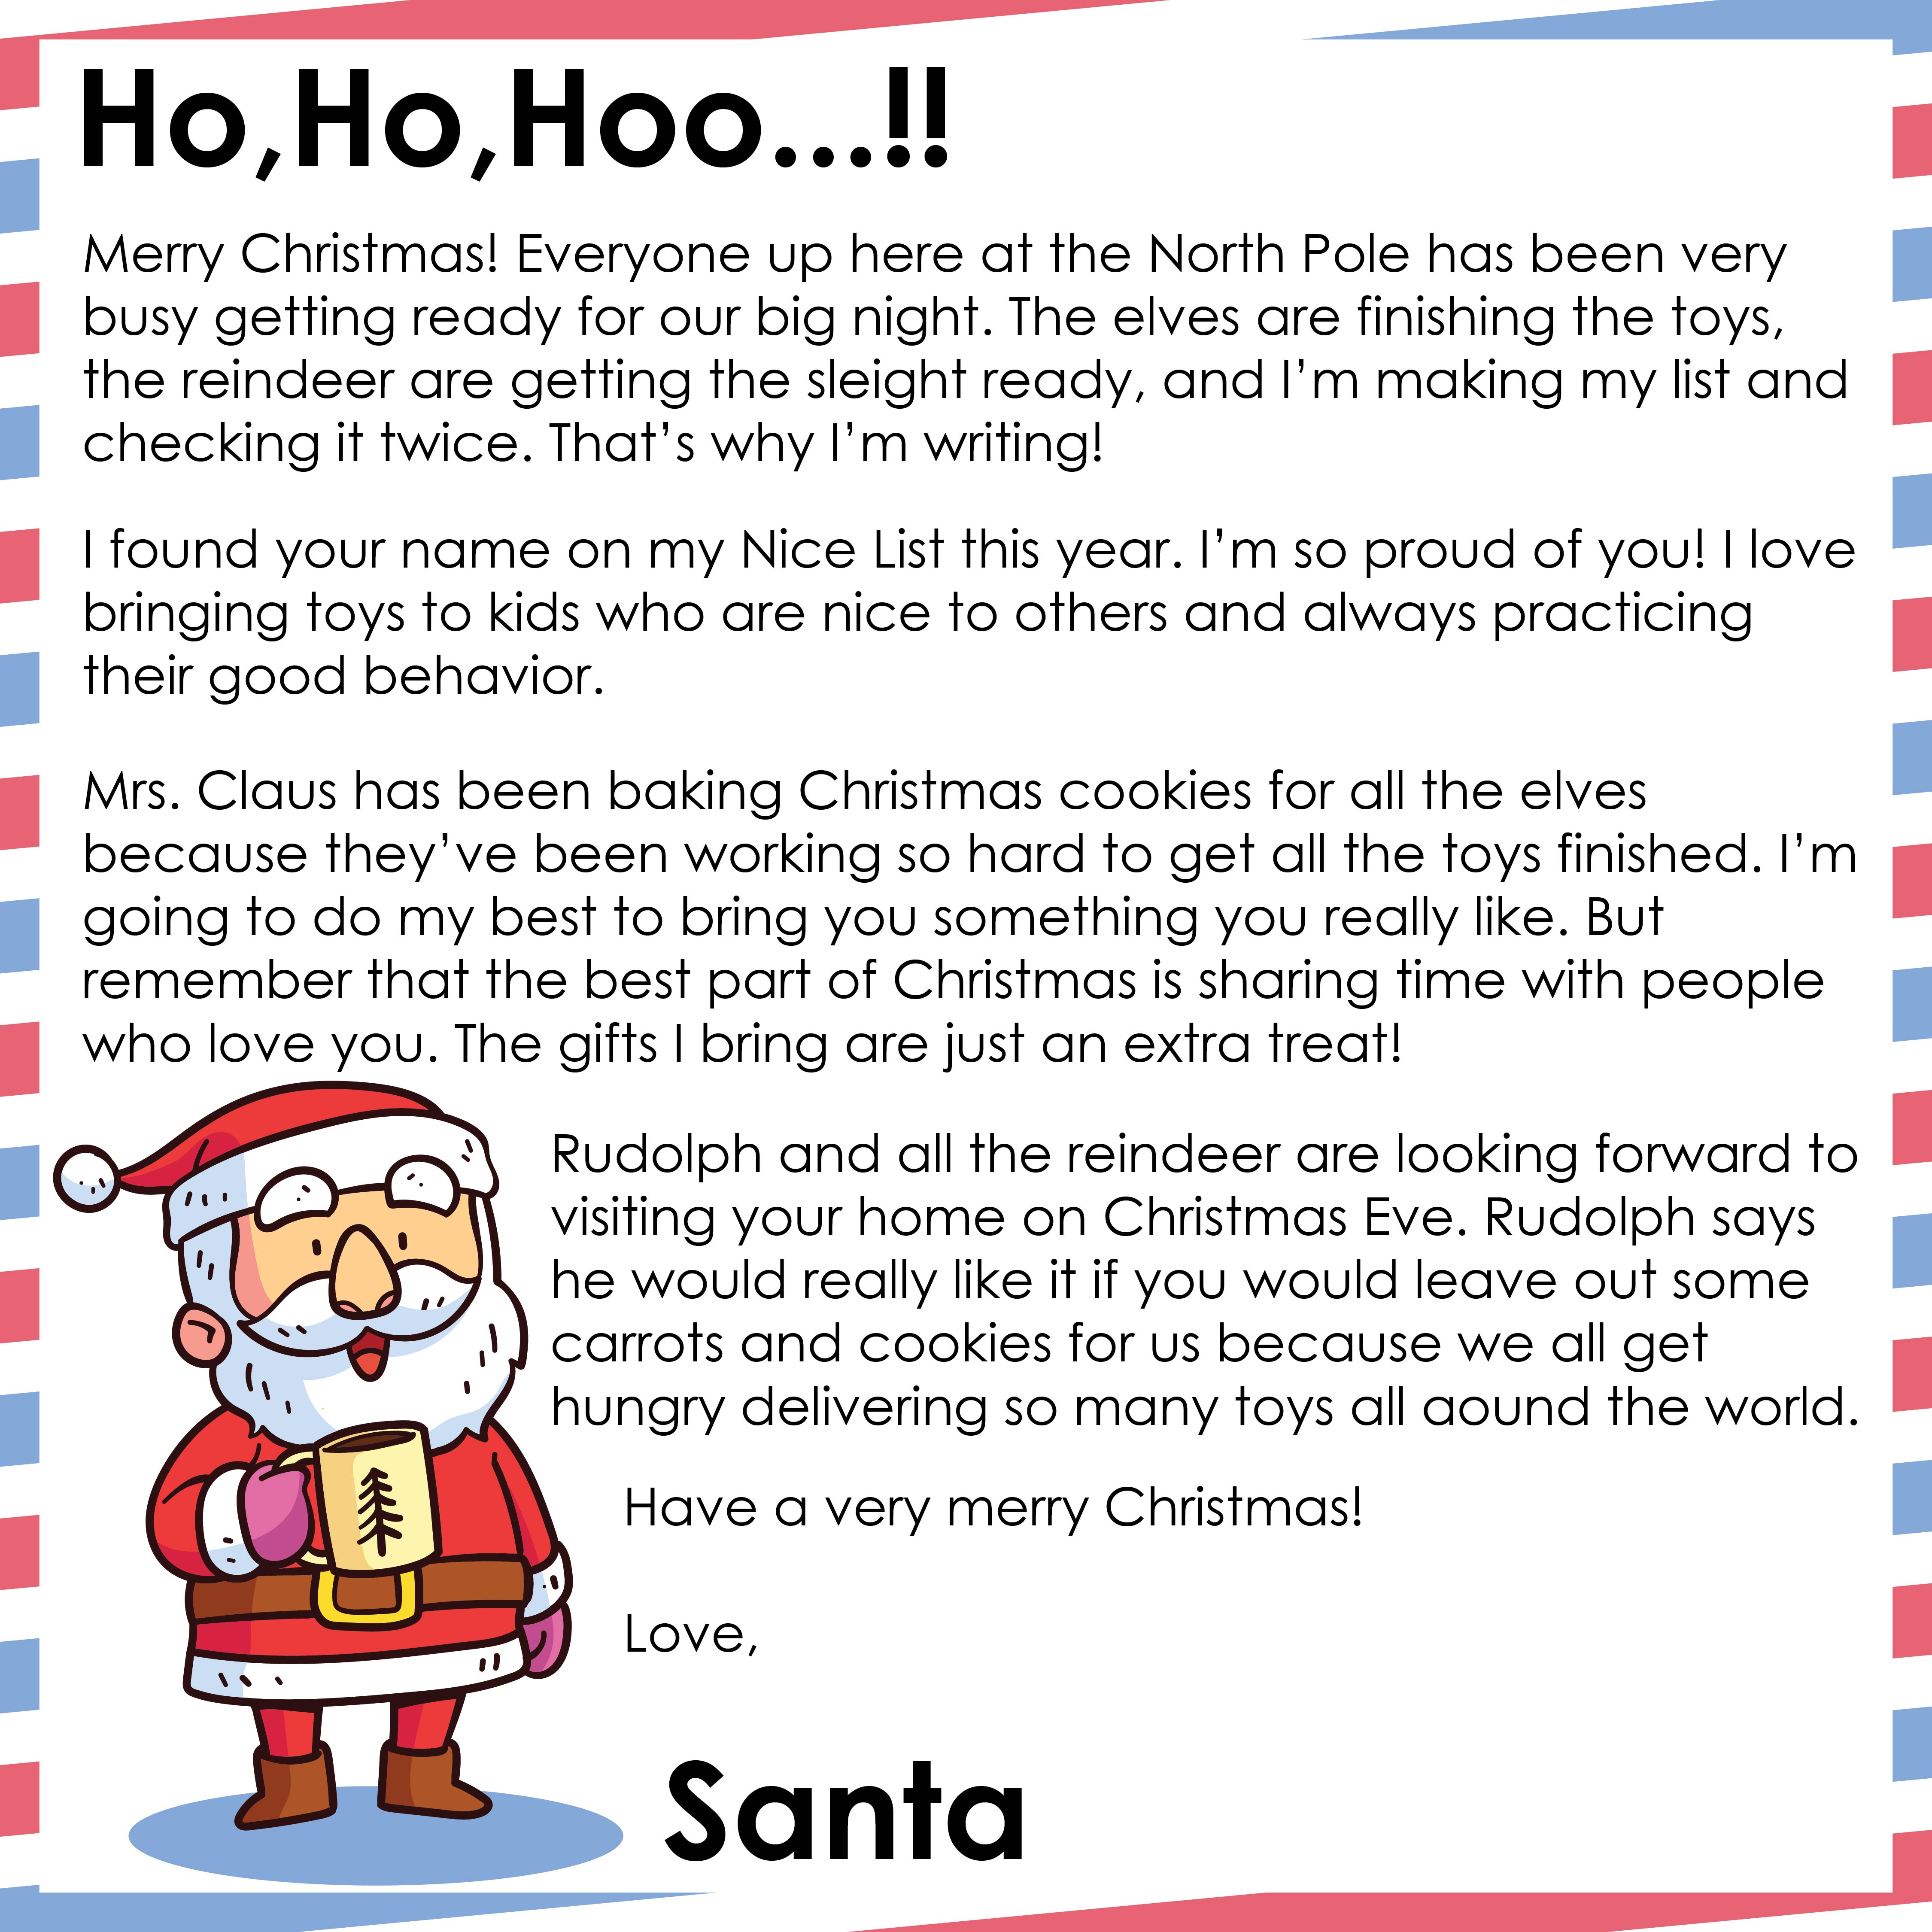 free-personalized-printable-letter-from-santa-to-your-child